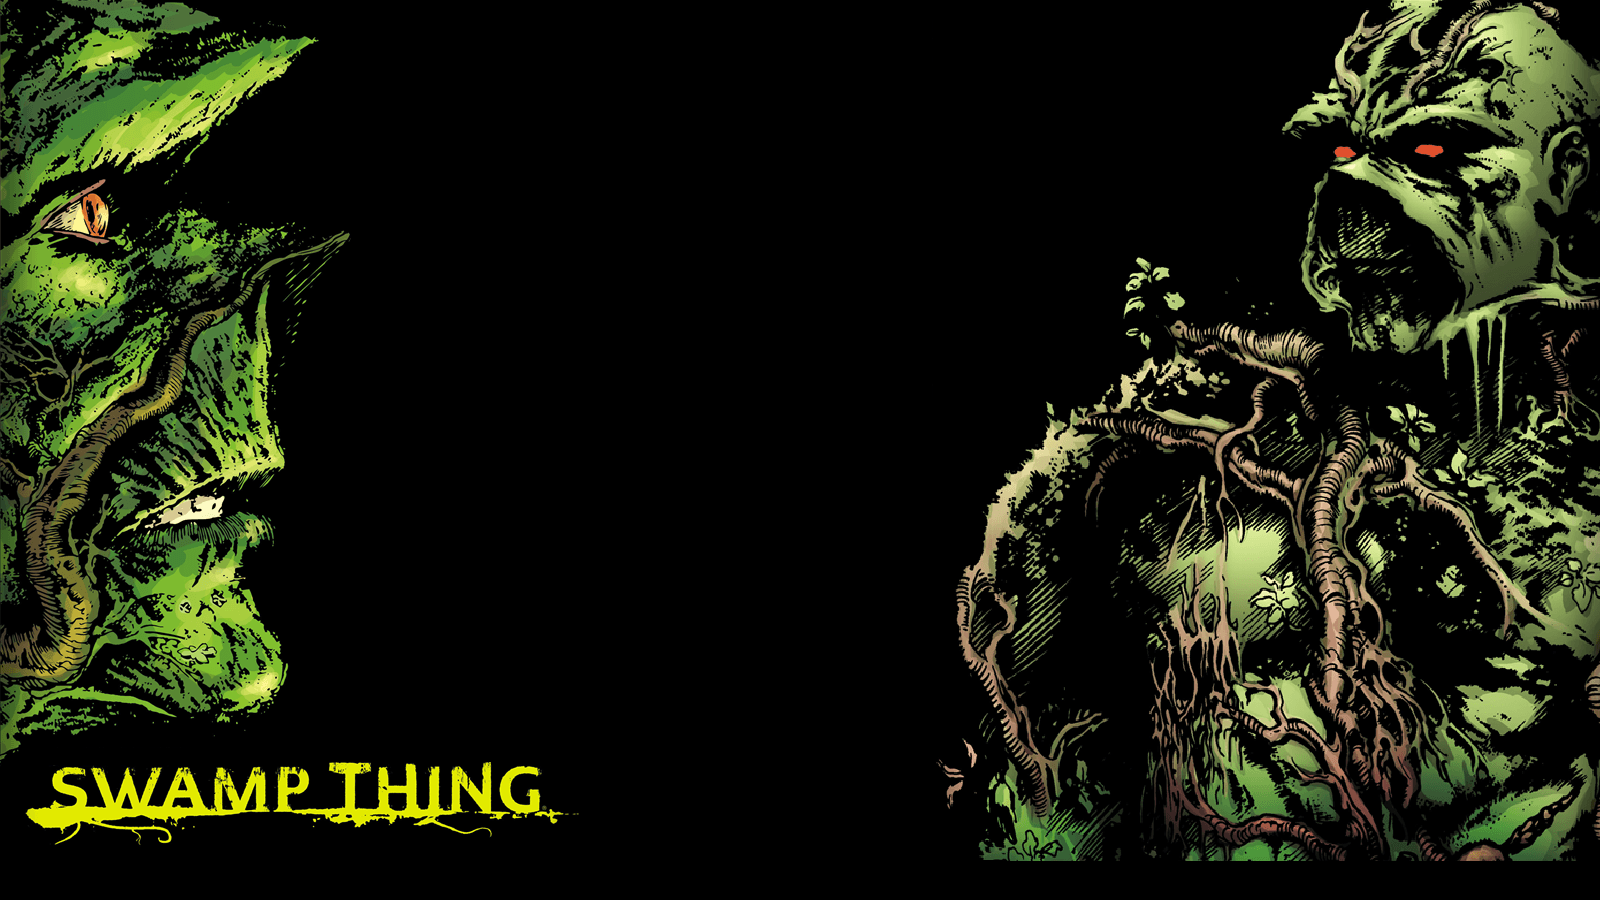 Made a Swamp Thing wallpaper from the covers of the first